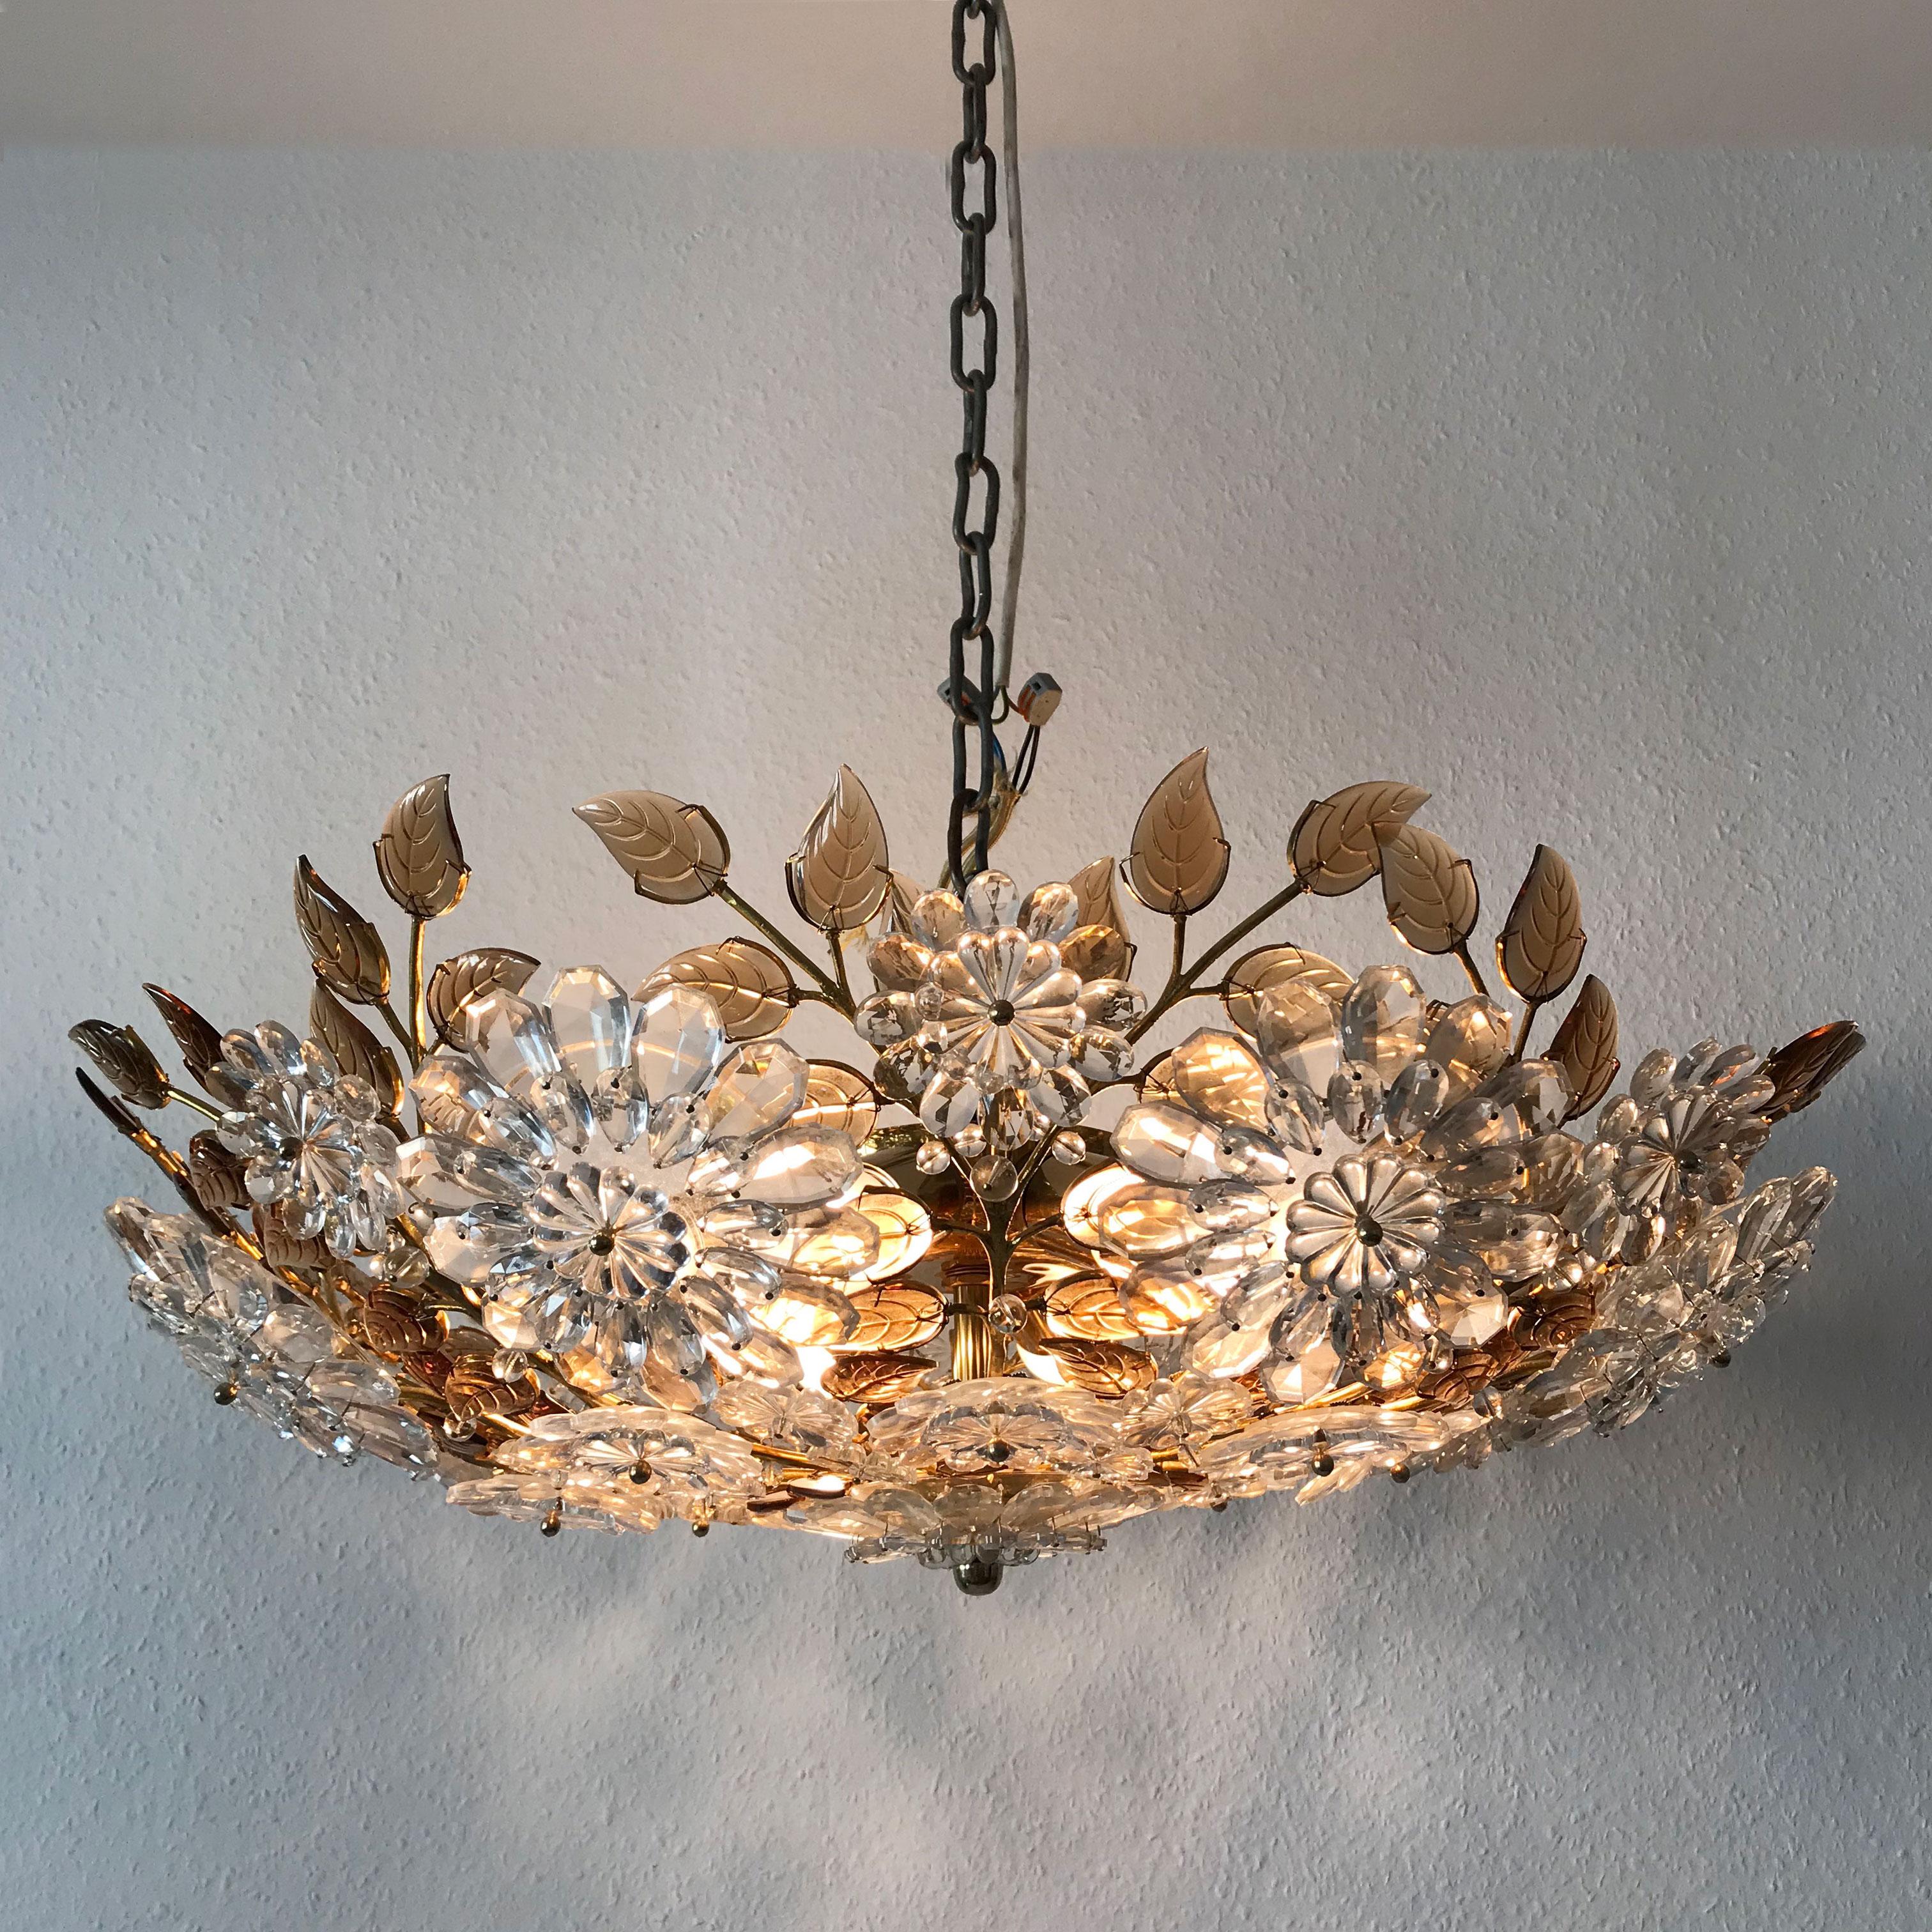 Gorgeous, exceptional Mid-Century Modern flower crystal chandelier or flush mount fixture in the Style of Oswald Haerdt for Lobmeyr, 1960s. A product of uncompromising craftsmanship and quality.

The lamp is executed in gilt brass and hundreds of